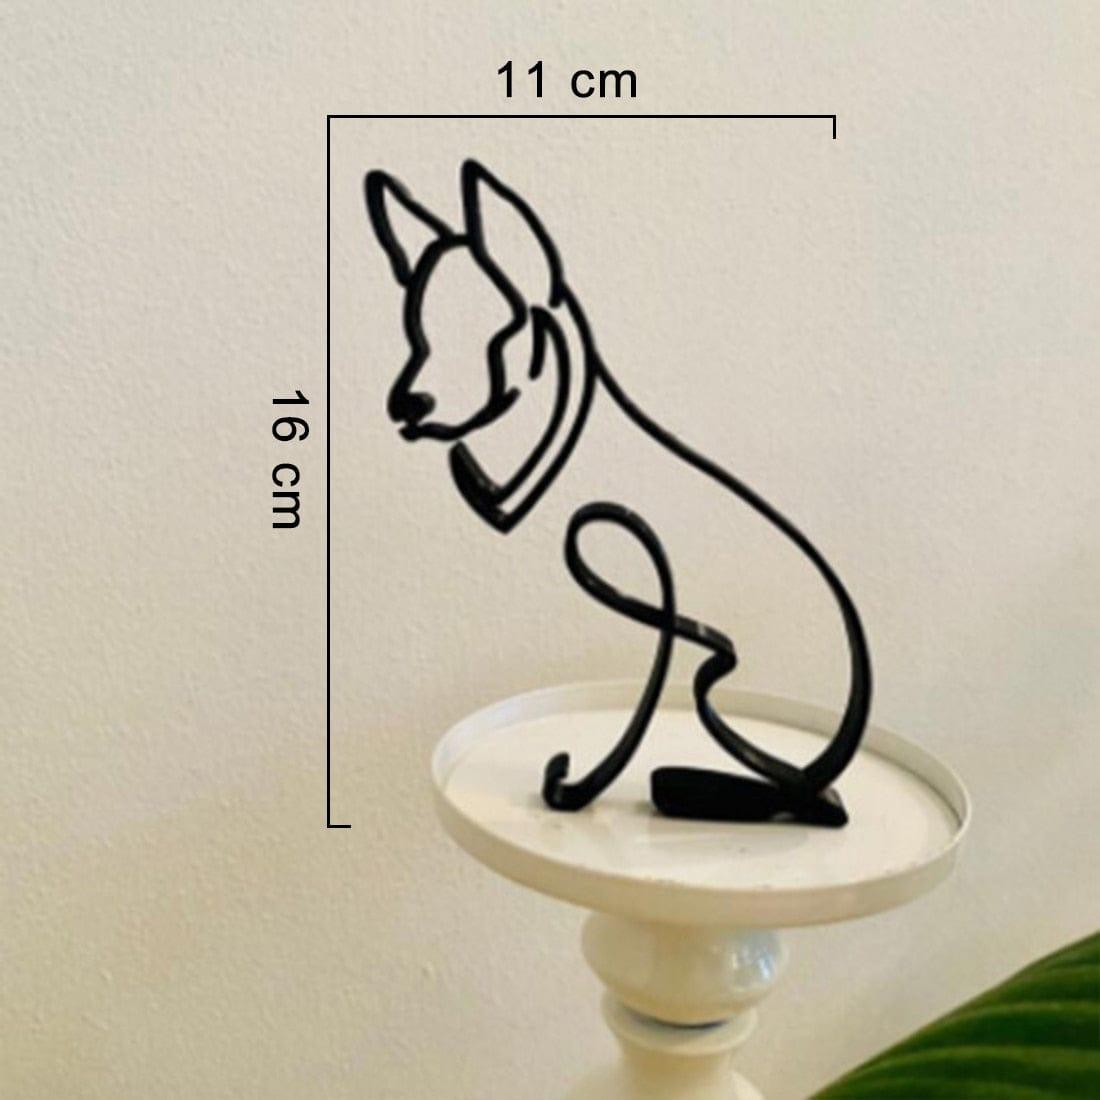 Shop 0 H Dog Art Sculpture Simple Metal Dog Abstract Art Sculpture for Home Party Office Desktop Decoration Cute Pet Dog Cats Gifts Mademoiselle Home Decor